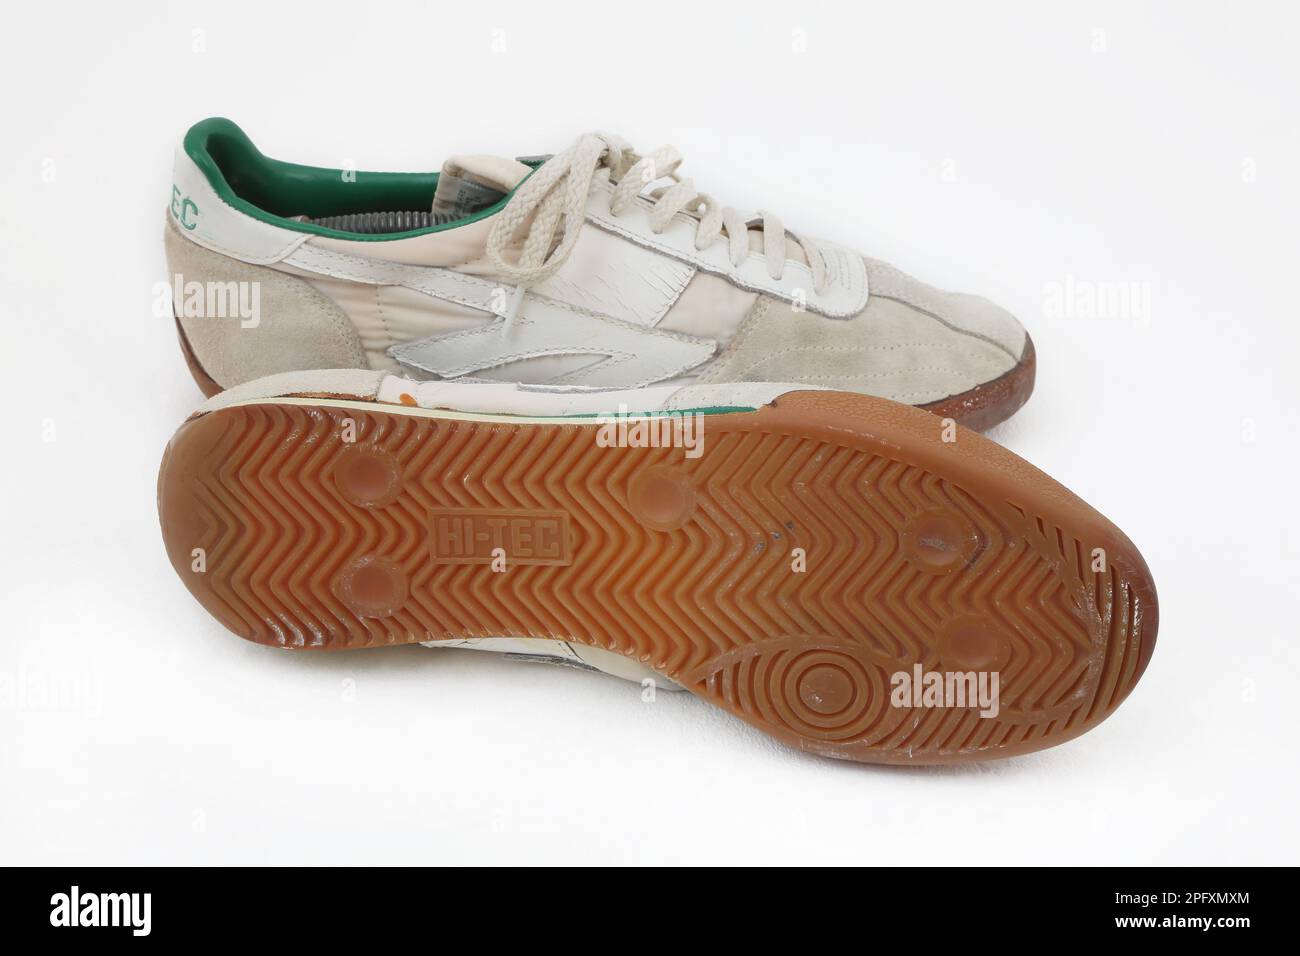 A Pair of Hi-Tec Squash Trainers one showing Tread on Sole Stock Photo